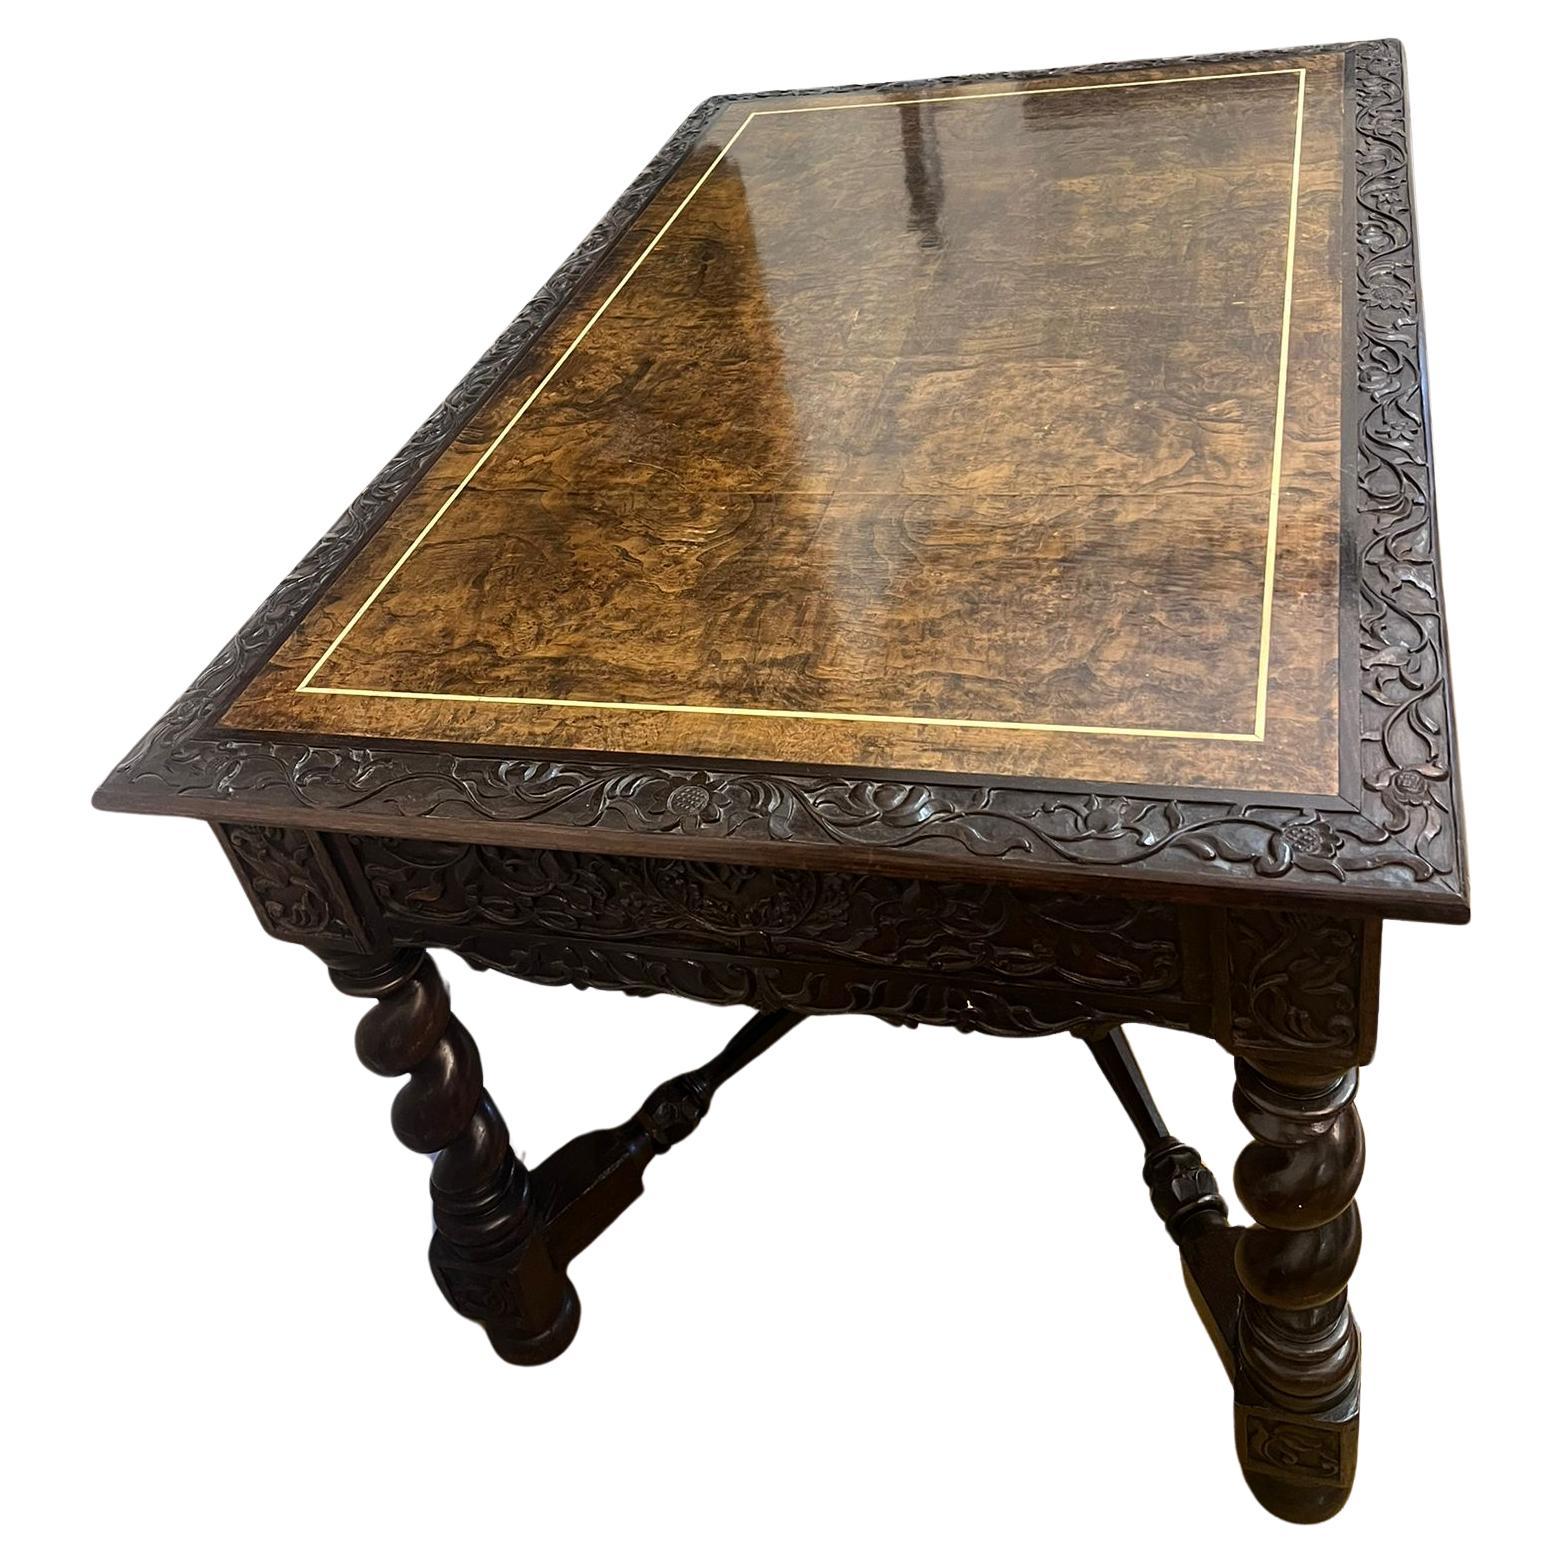 
A captivating piece of history, the Dutch East Indian Captain's Writing Desk. This extraordinary early 18th-century Anglo-Indonesian table showcases the artistry of the time, carved from rich rosewood and walnut. The prestigious VOC insignia,